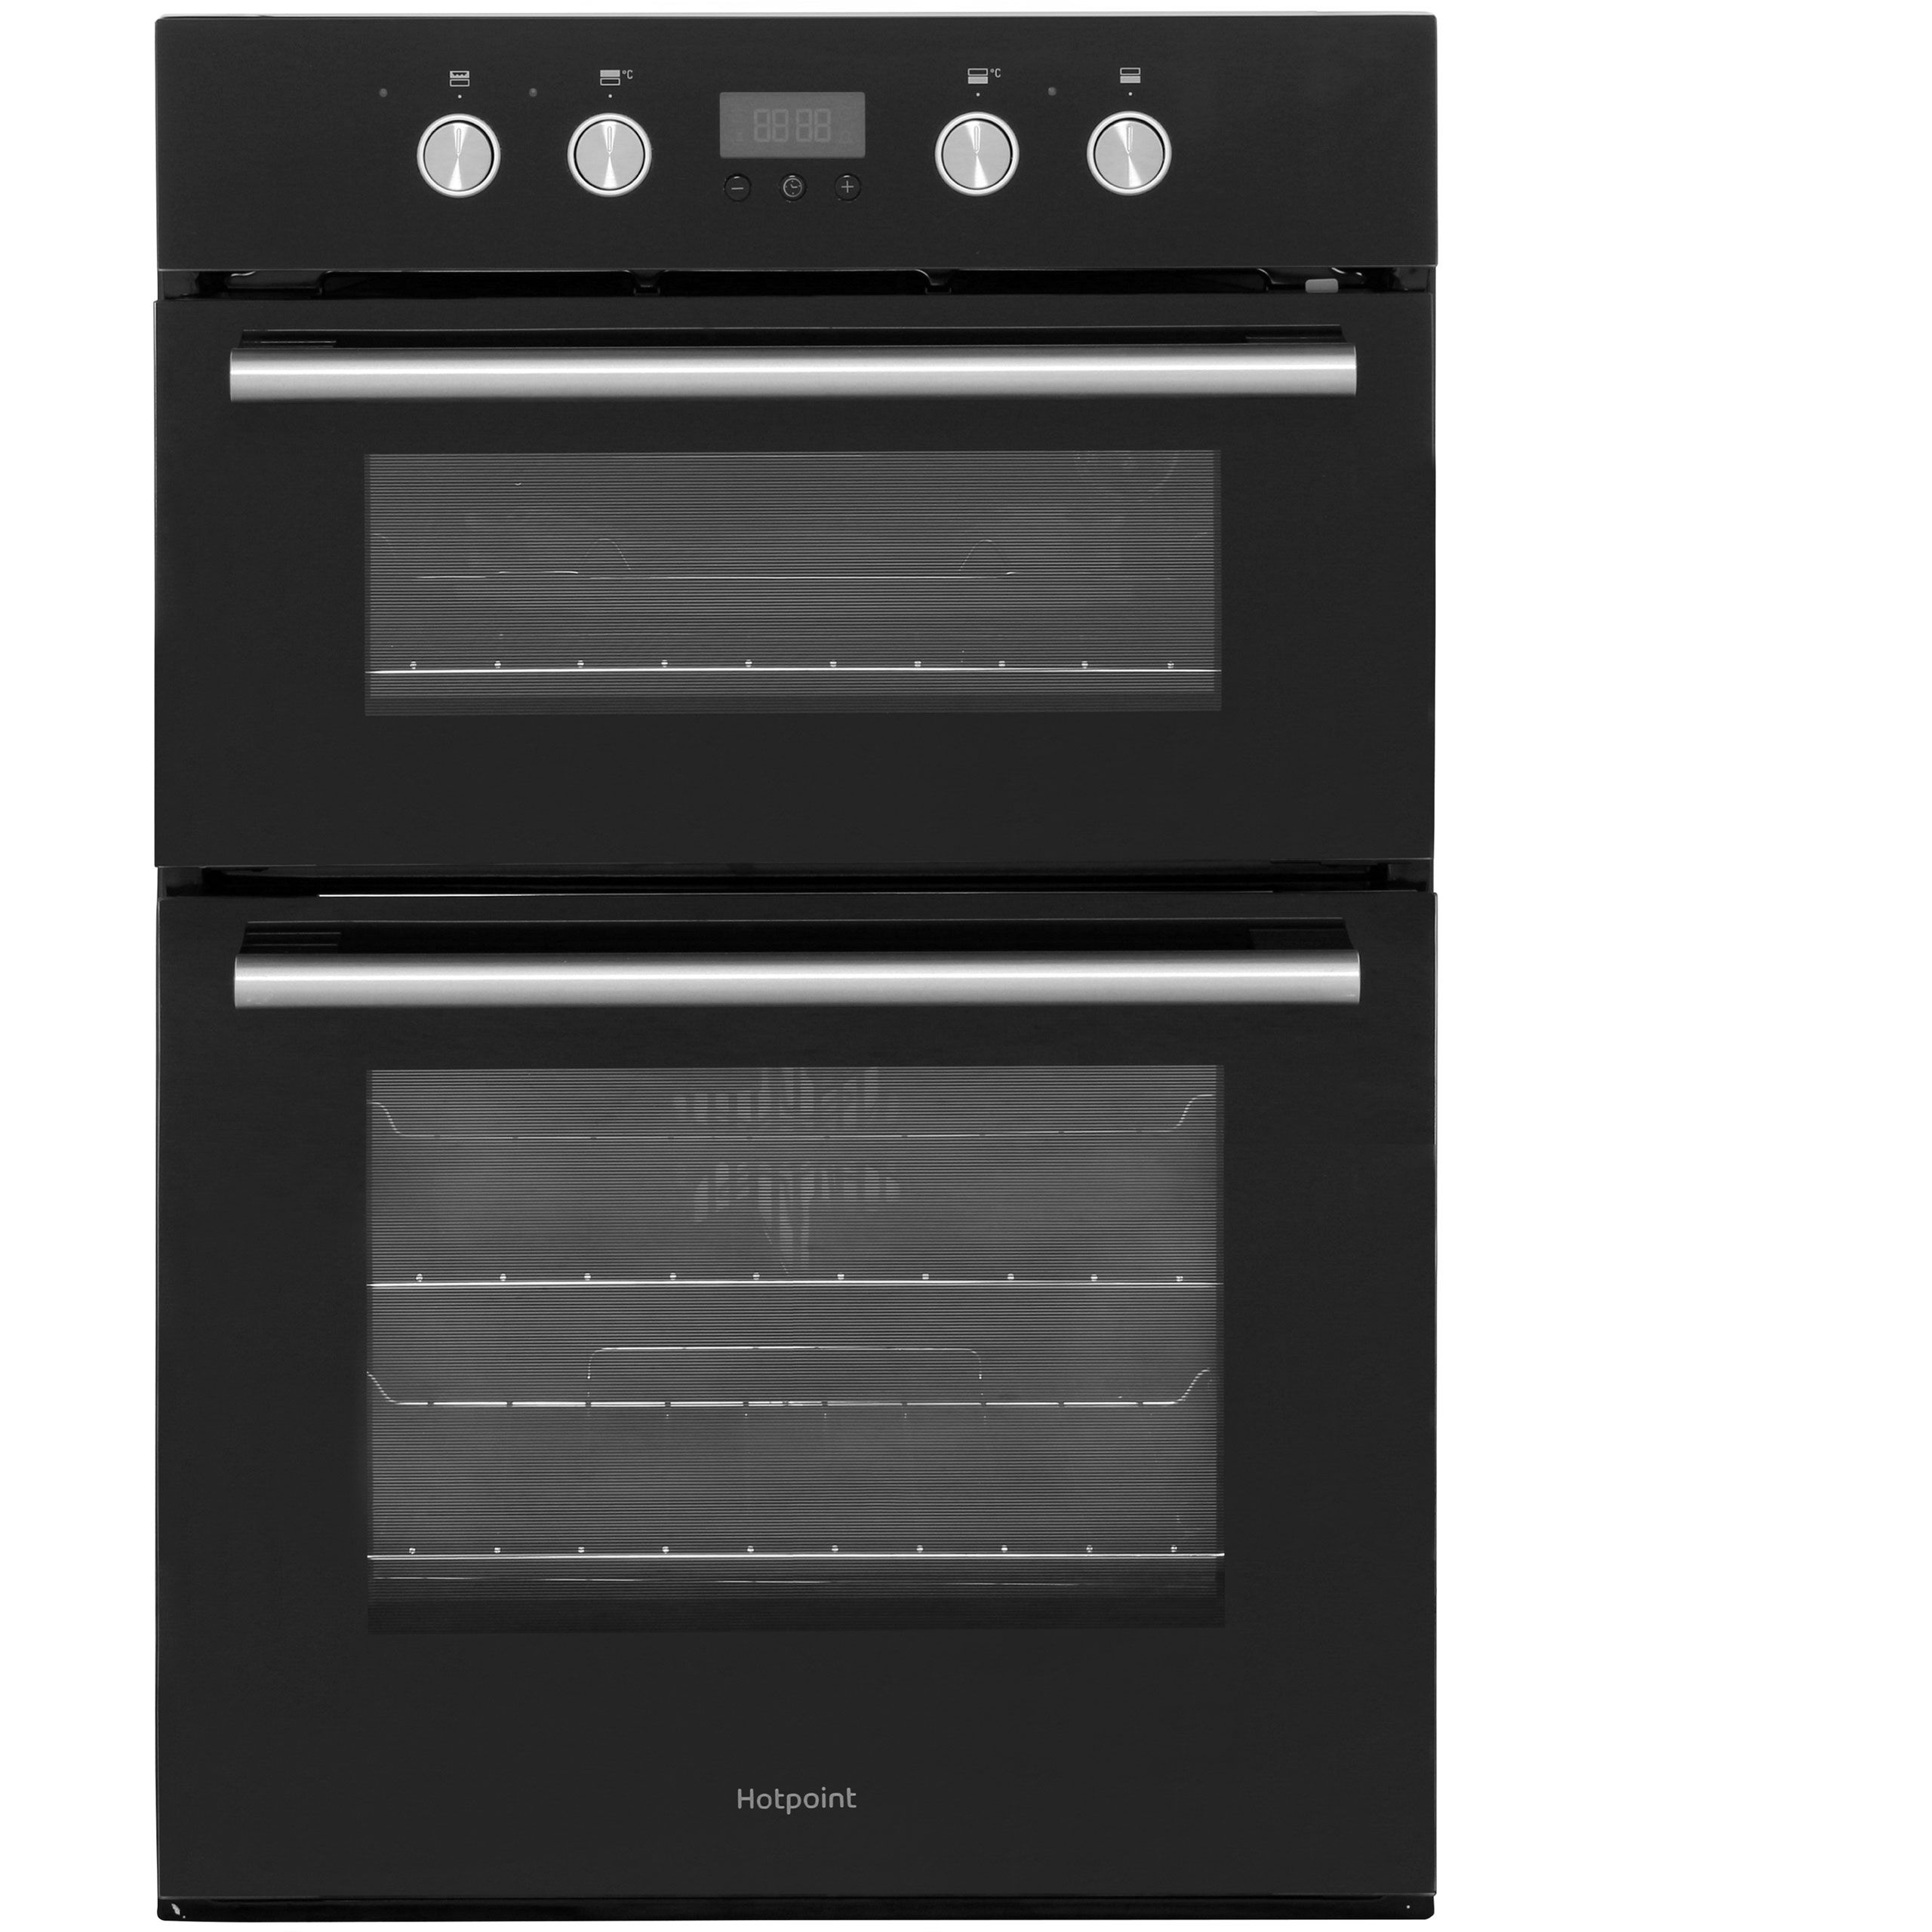 Hotpoint Class 2 DD2844CBL Built In Electric Double Oven - Black - A/A Rated, Black